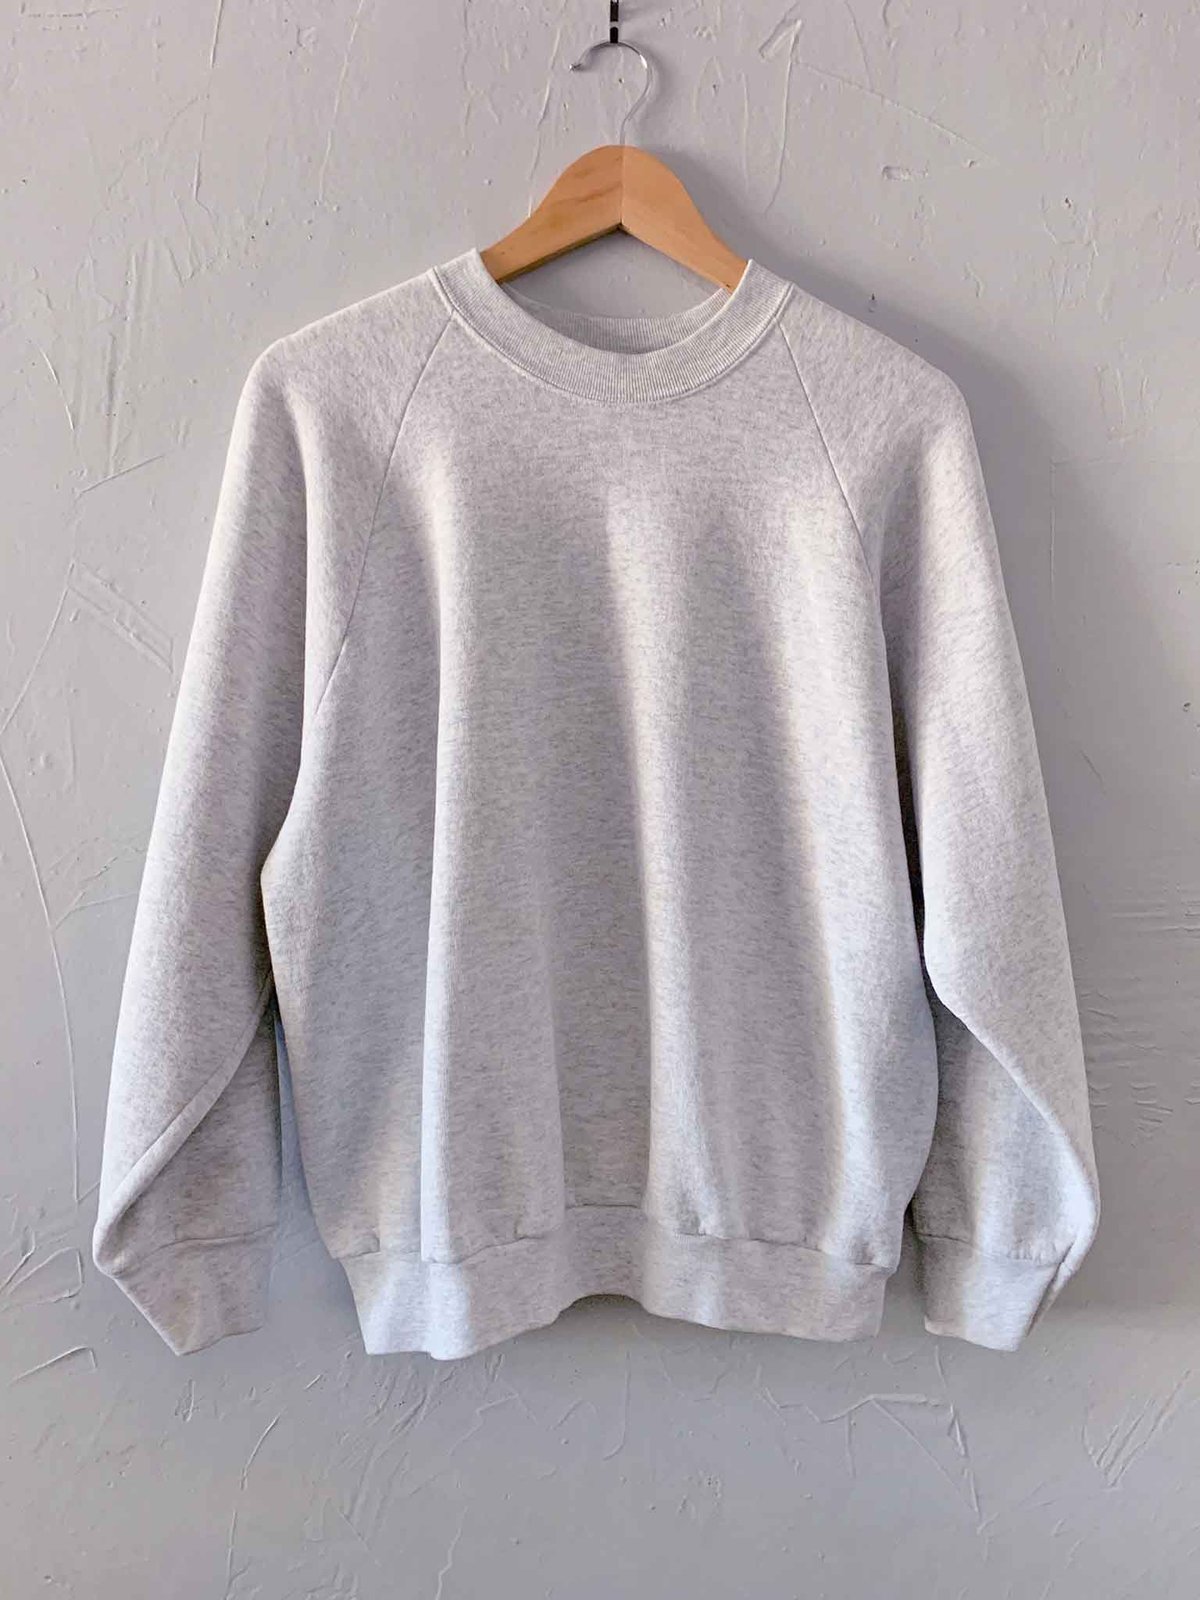 NISH | Vintage Fruit of the Loom Pullover Sweatshirt -Made in USA - L